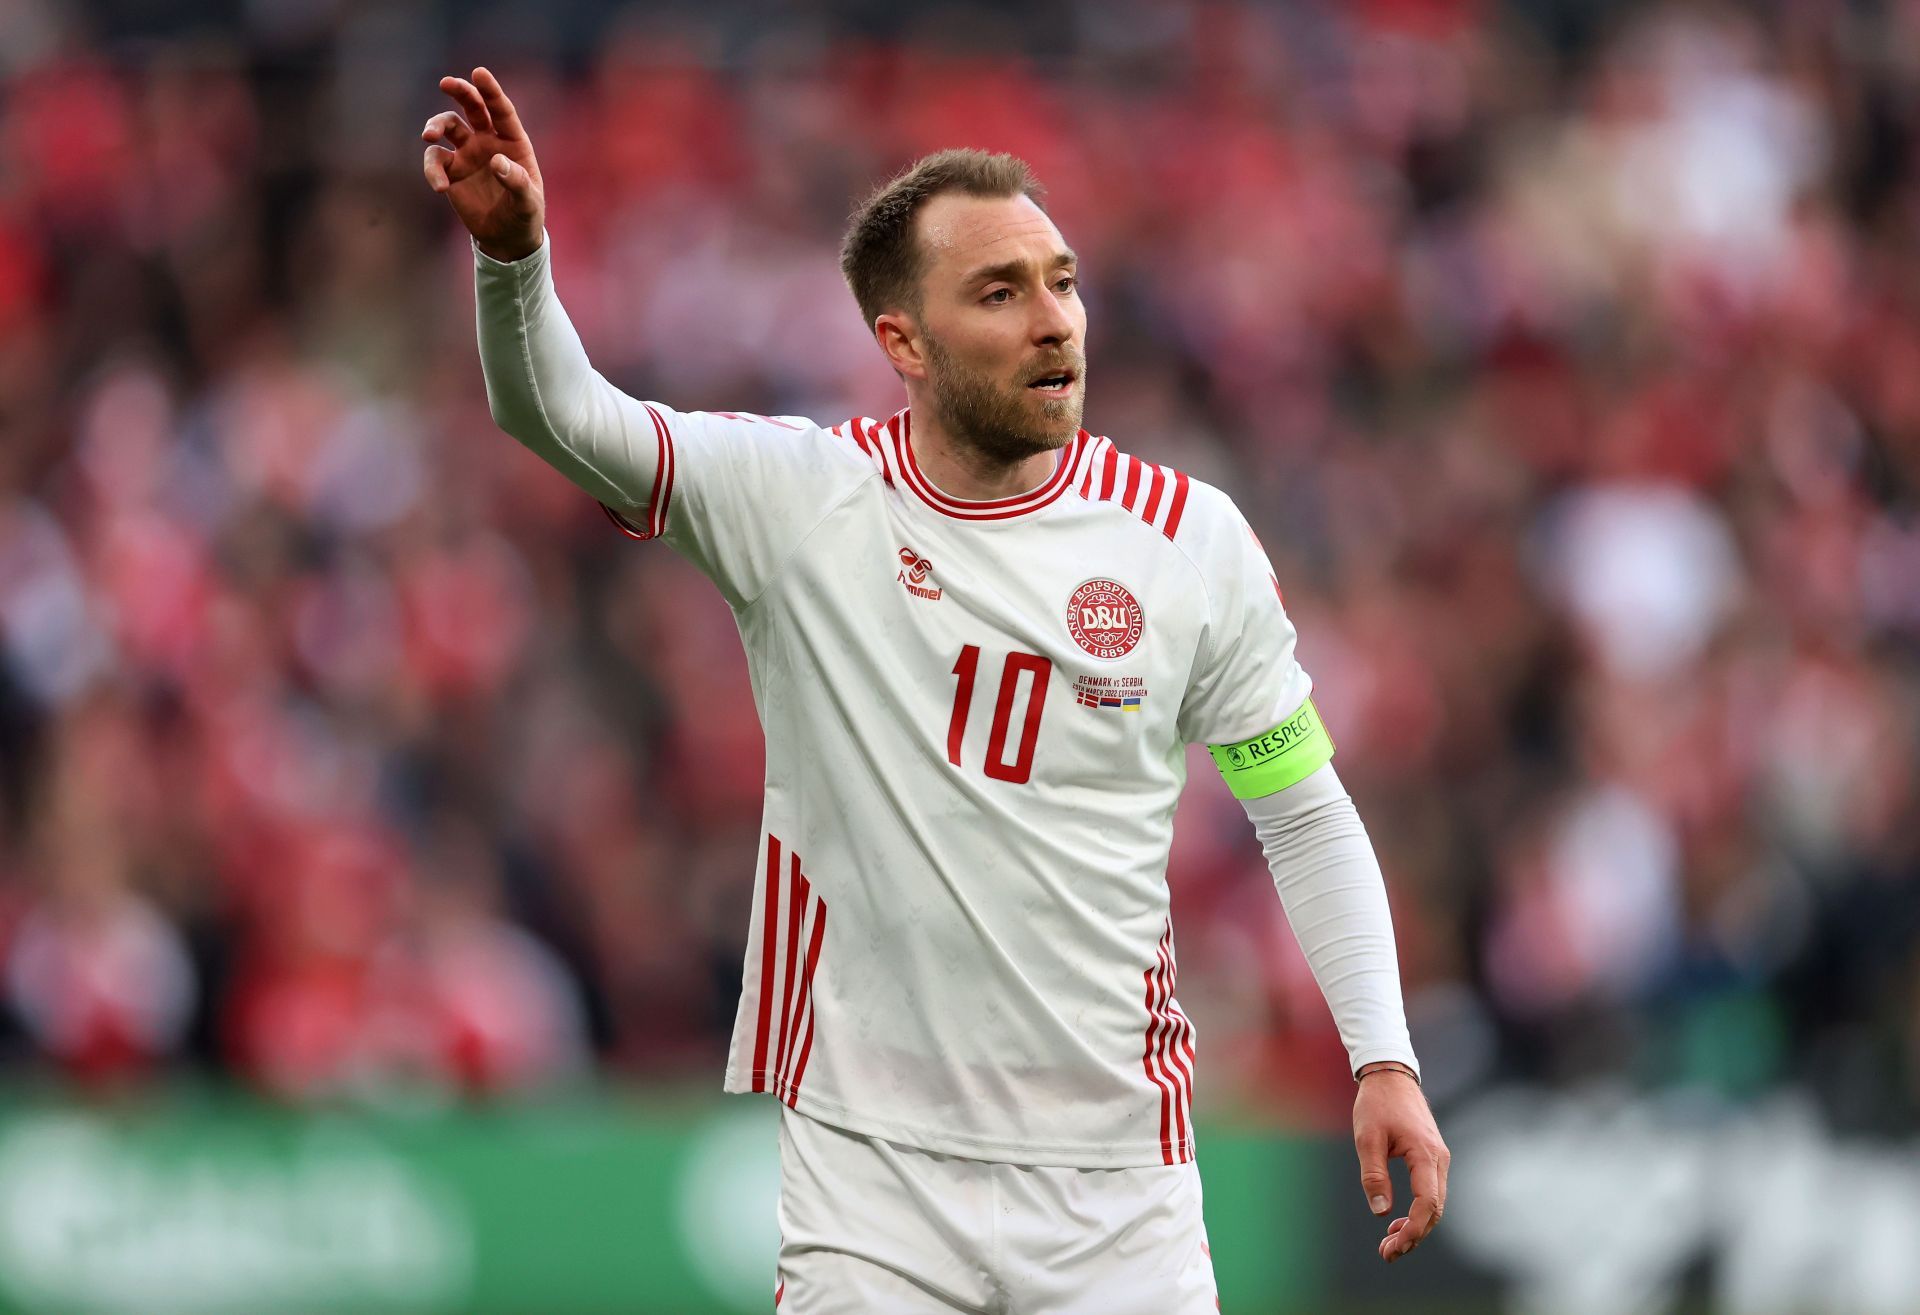 Christian Eriksen could be one of the stars of the 2022 FIFA World Cup